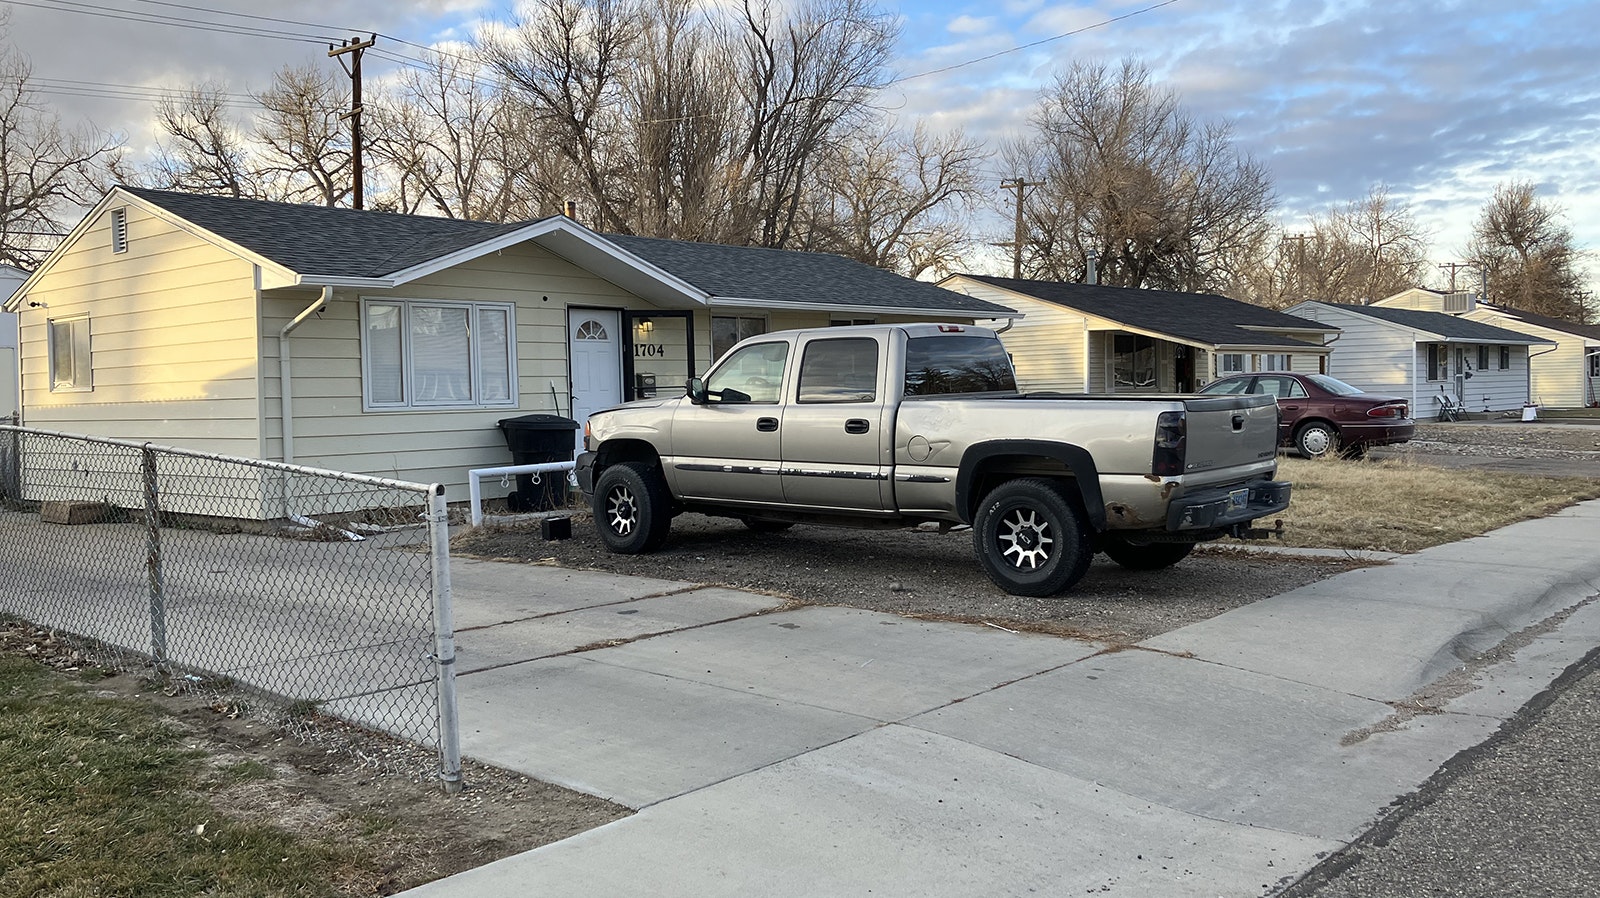 Casper Police Department officers and Natrona County Sheriff’s Office deputies responded to a call at this home early Saturday on a report of shots fired. One person was hospitalized with a non life-threatening gunshot wound.